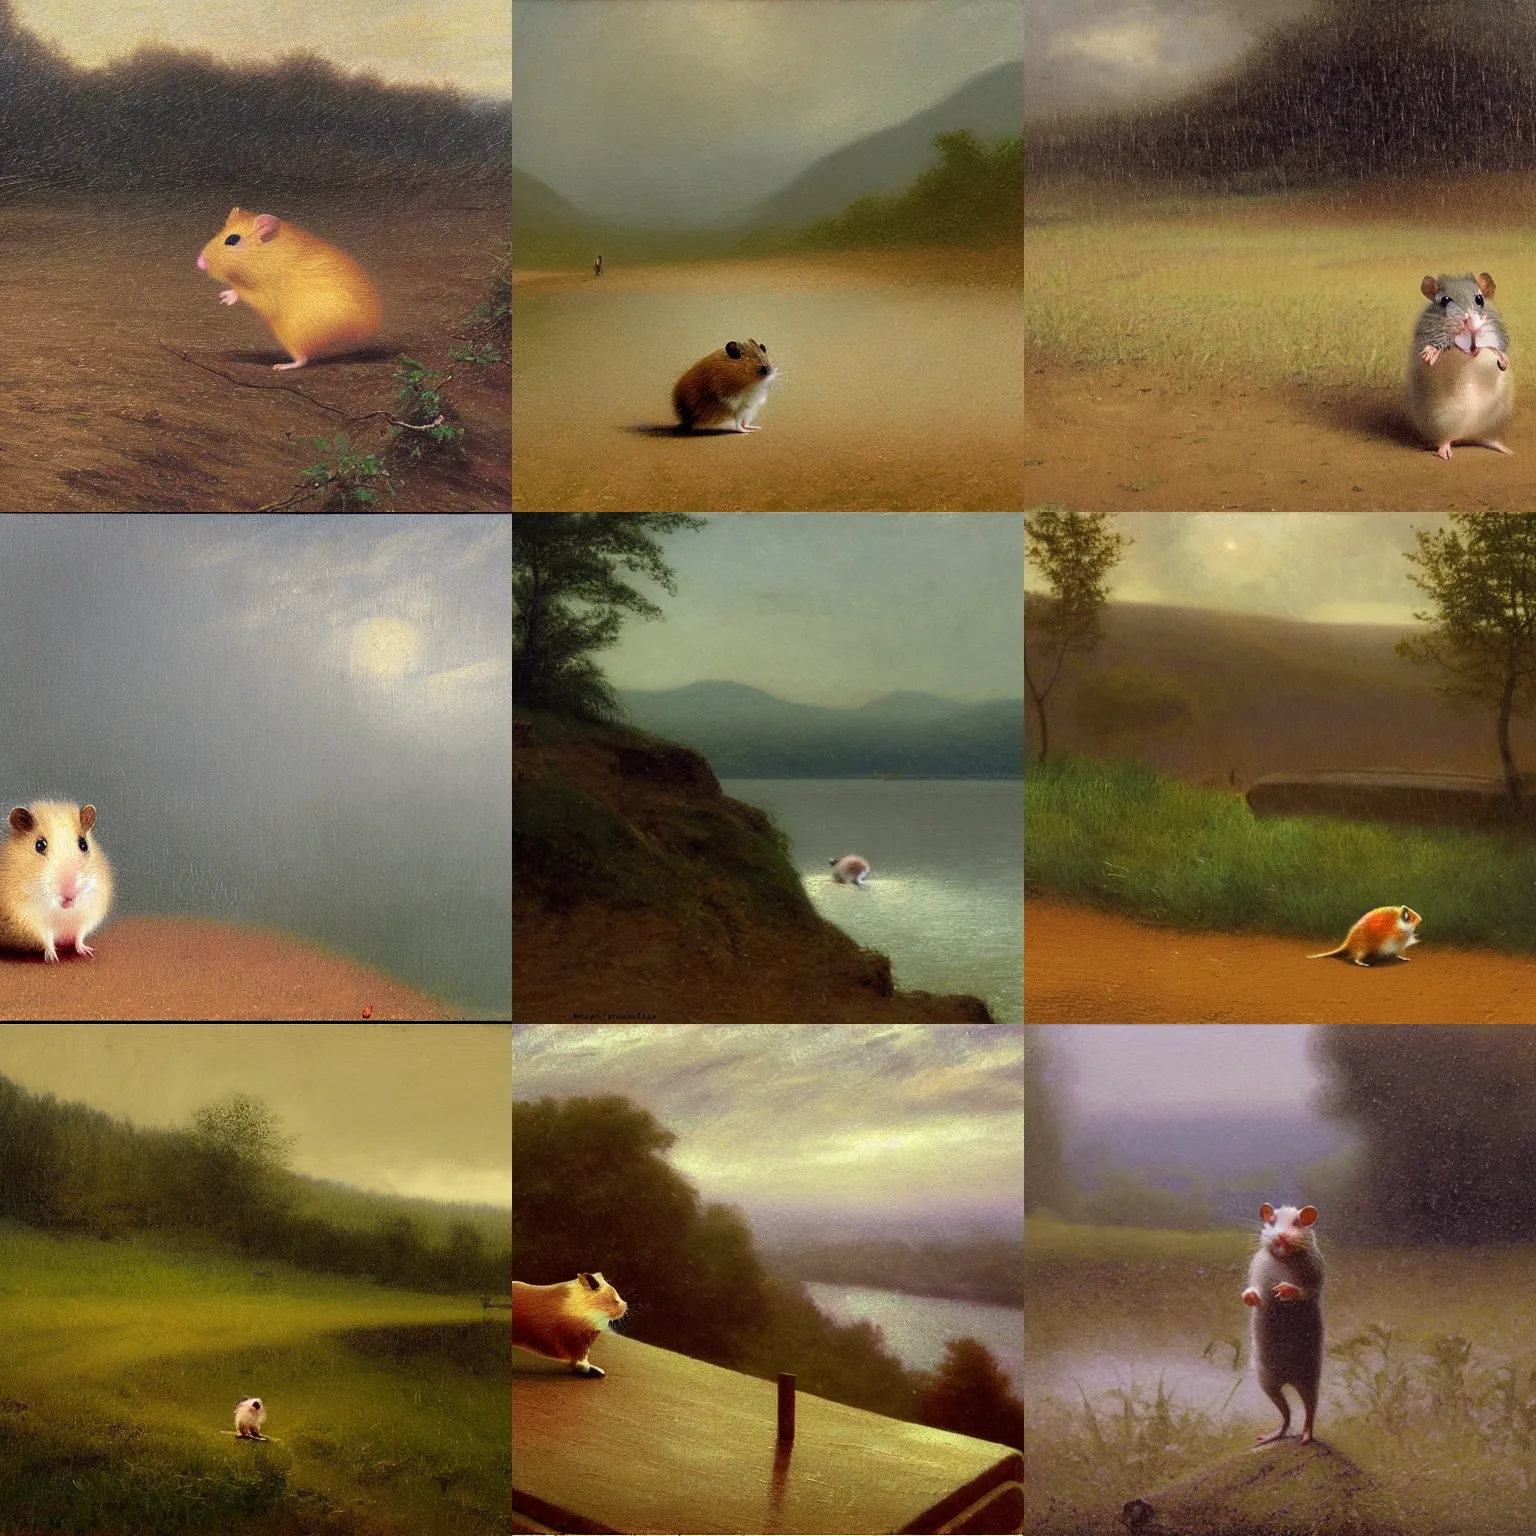 Prompt: hamster standing in the rain, a matte painting by muirhead bone, cg society, hudson river school, creative commons attribution, photo, filmic